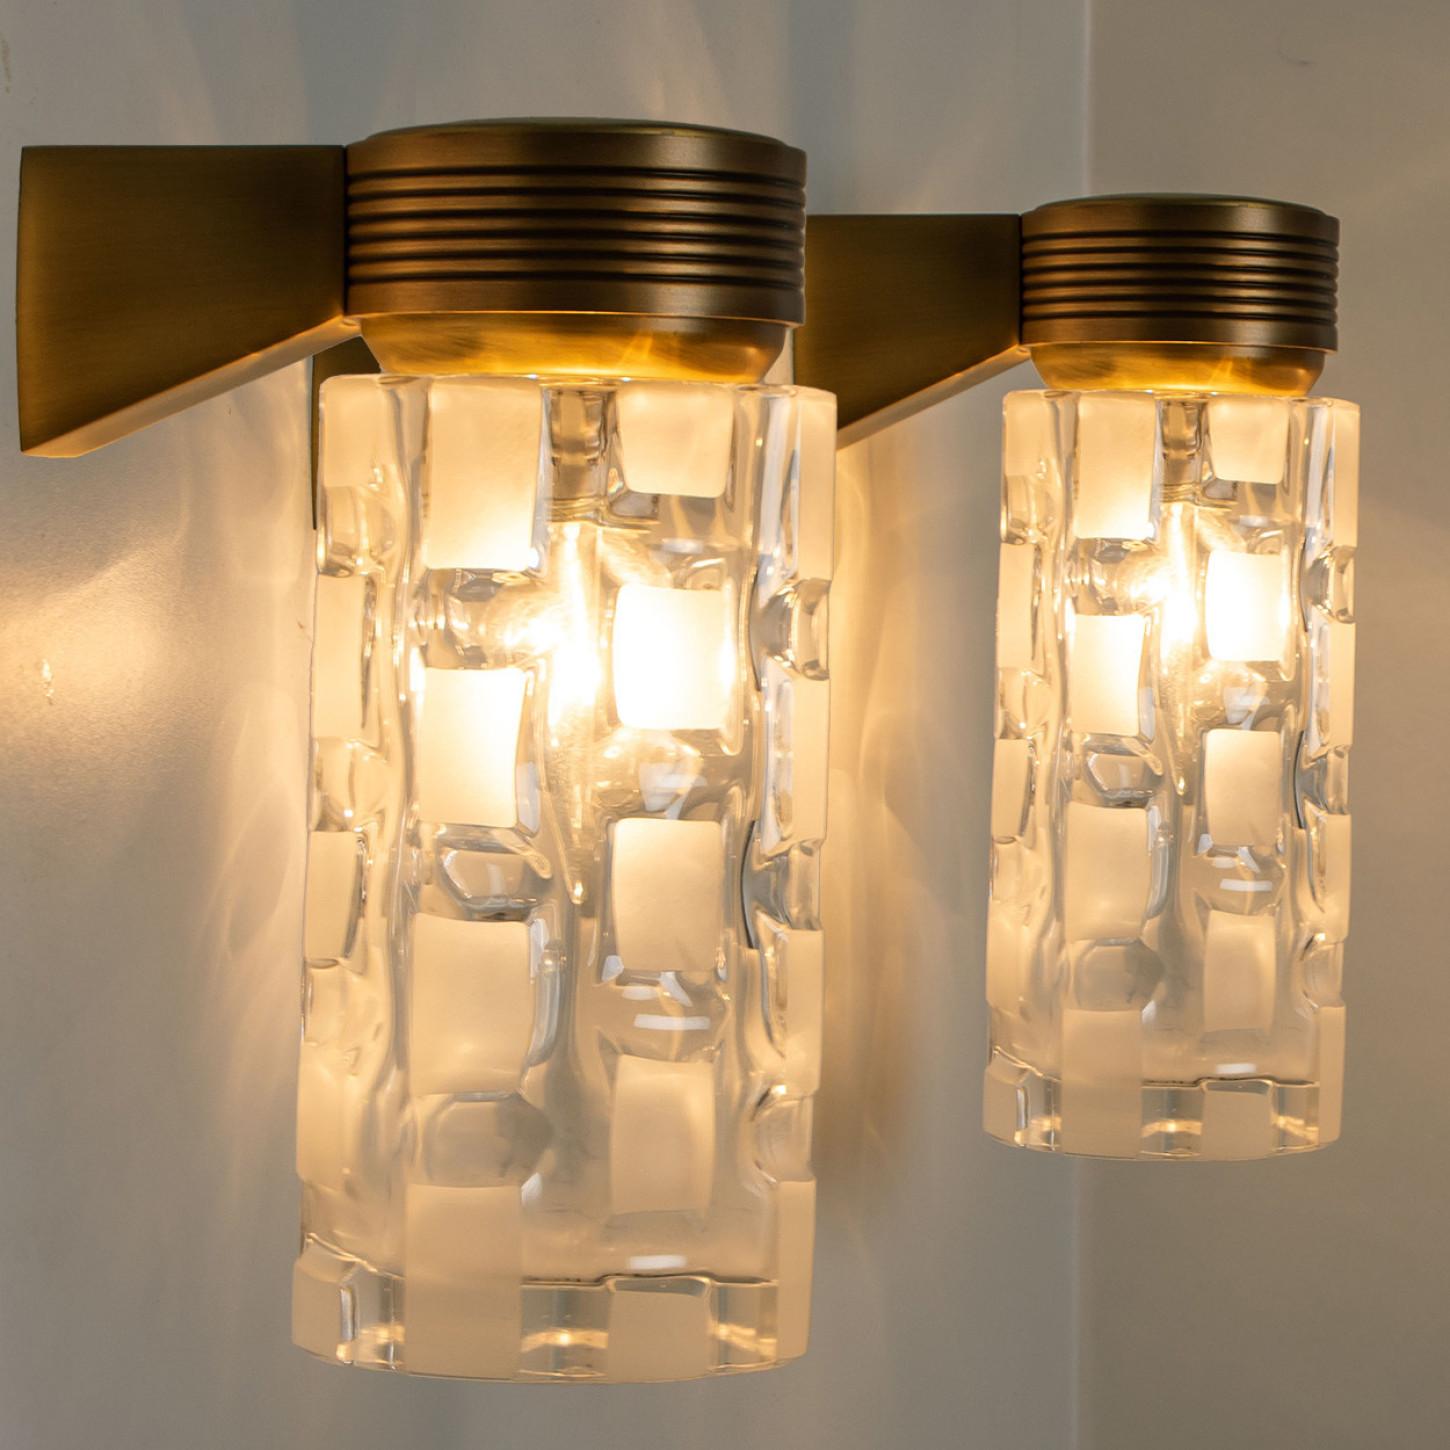 Brass Pair Of Hillebrand Clear and Opaque Glass Wall Light Fixtures, 1970s For Sale